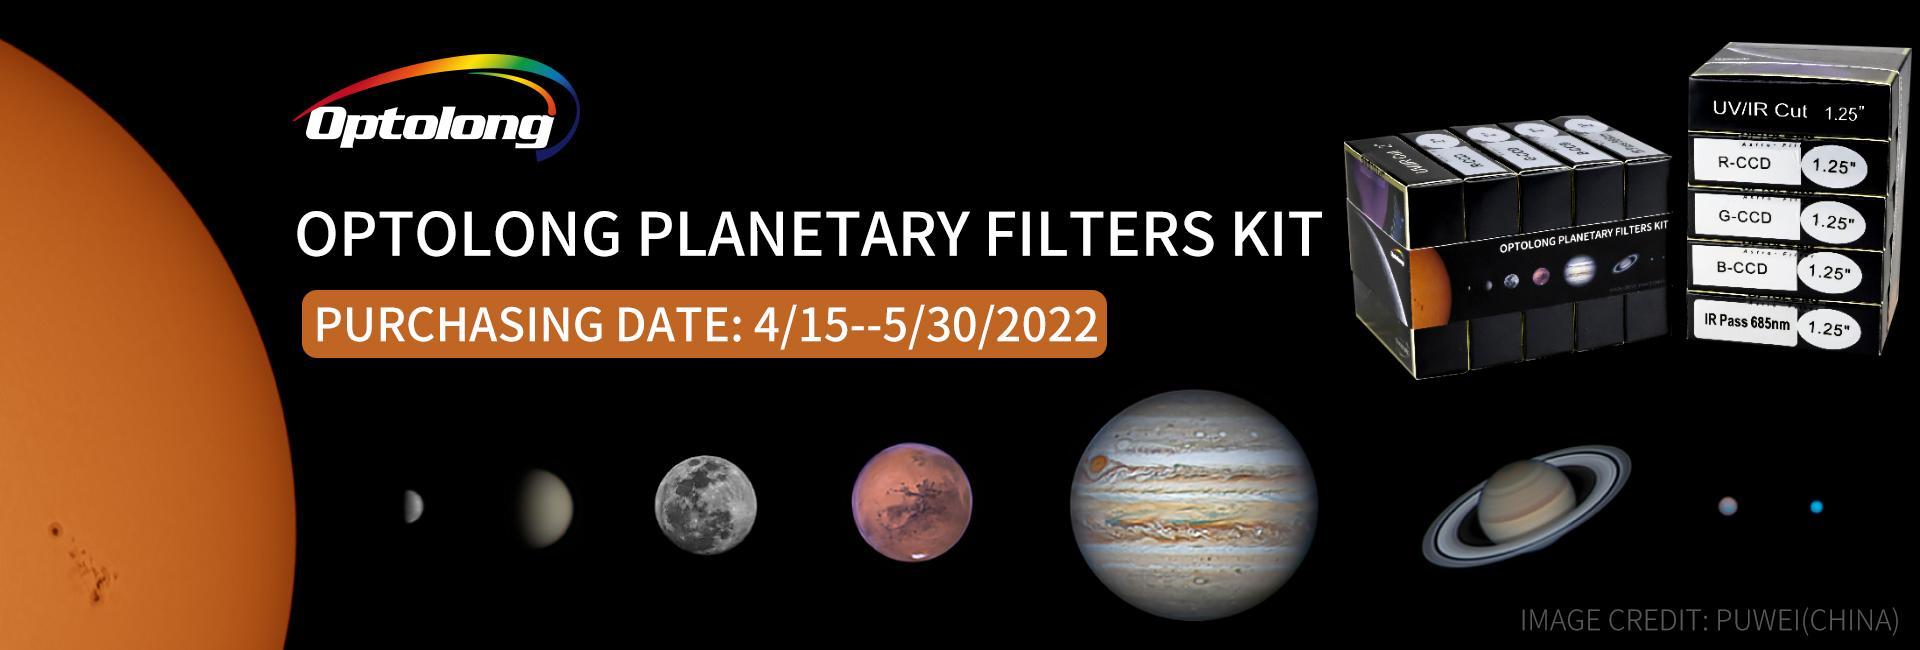 Optolong planetary filters kit, purchasing time: 4/15-5/30/2022